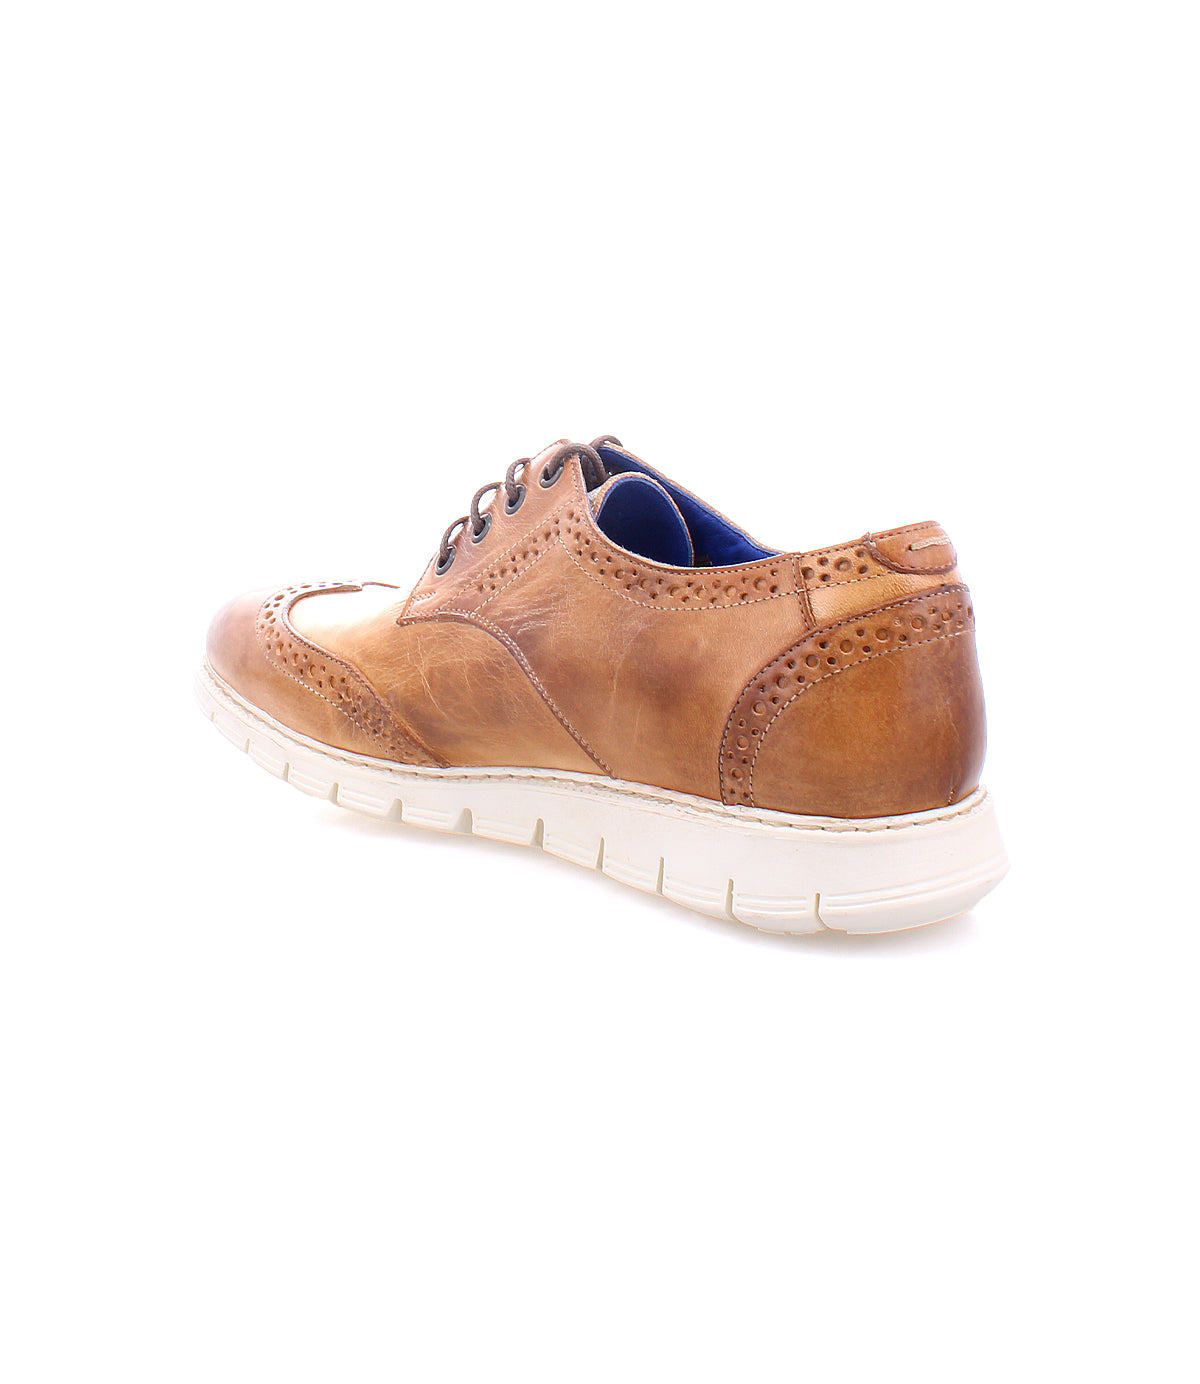 A lightweight Bed Stu Cayuga II brown leather shoe with a white sole.